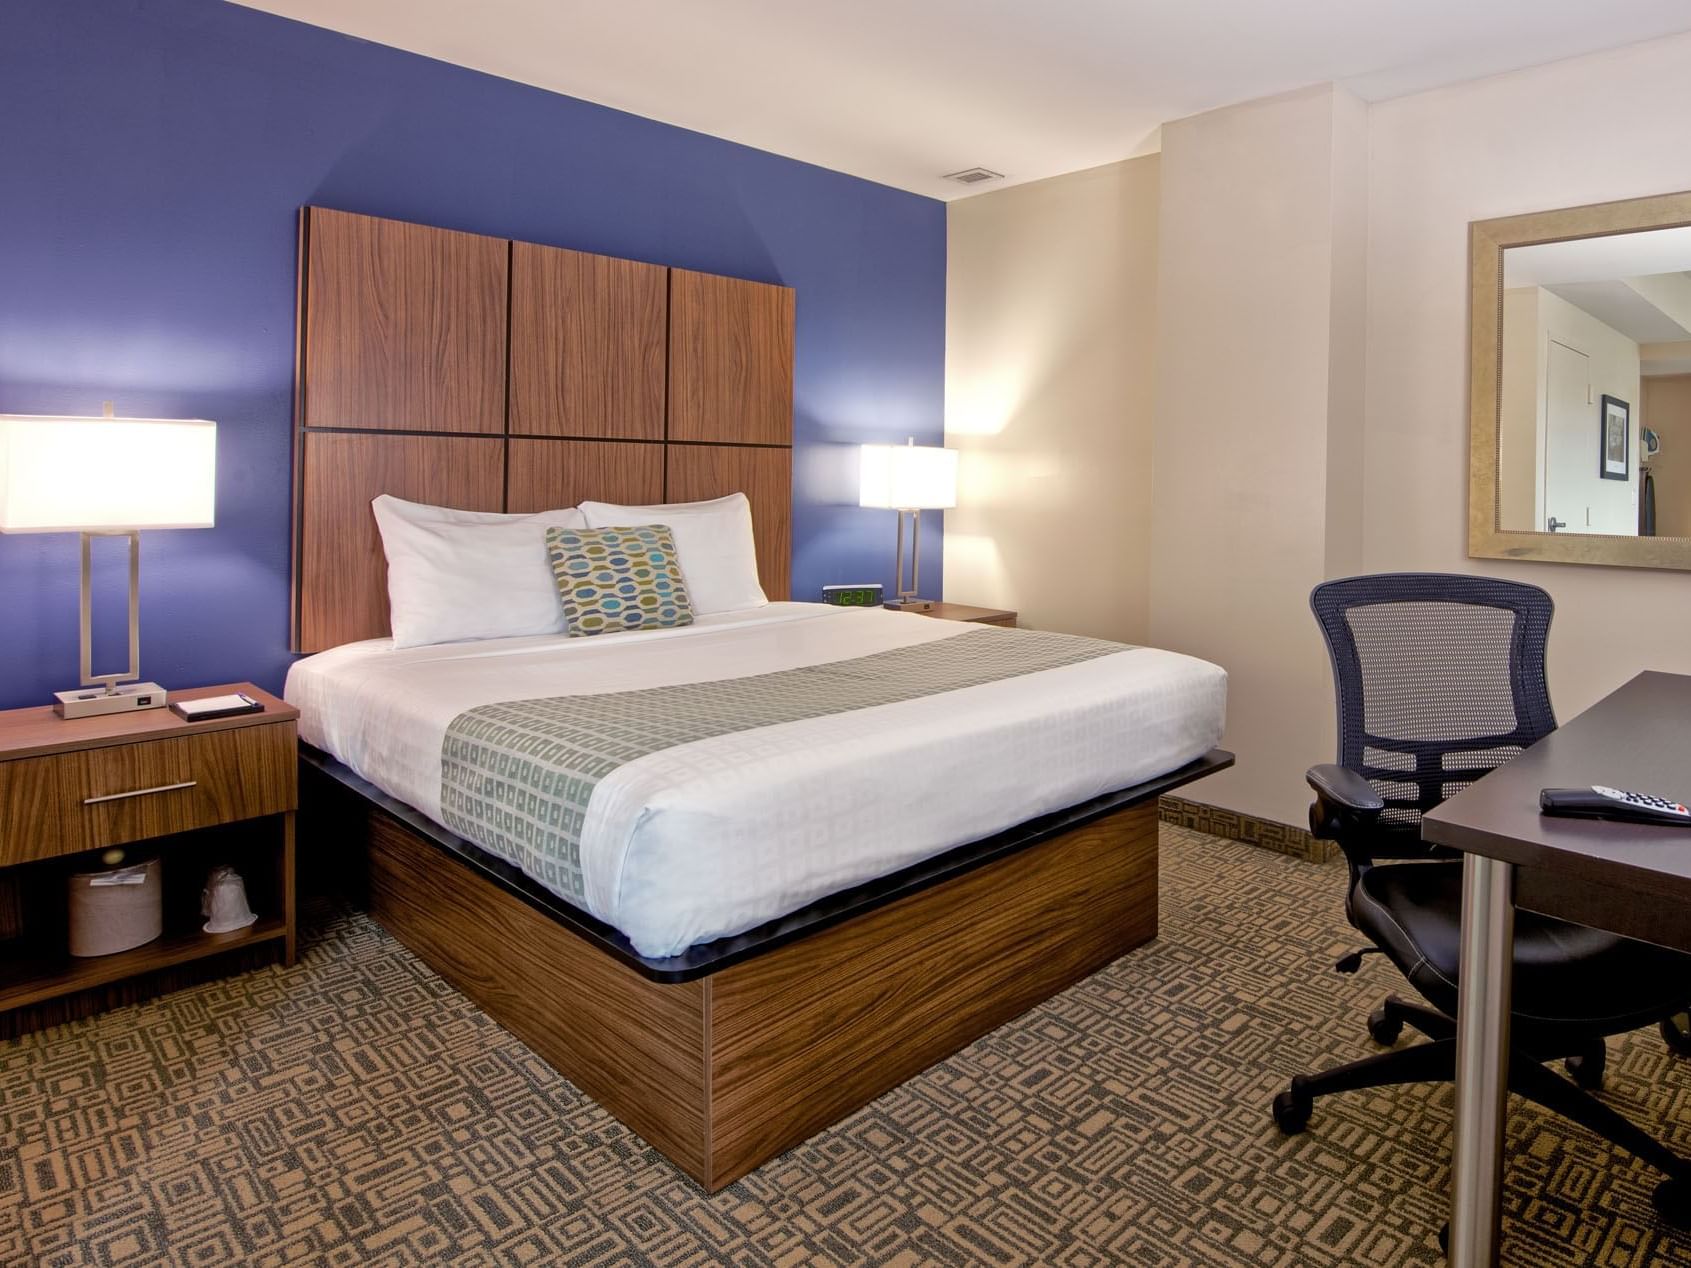 Bed in Standard Queen Jr. suite at Kellogg Conference Center